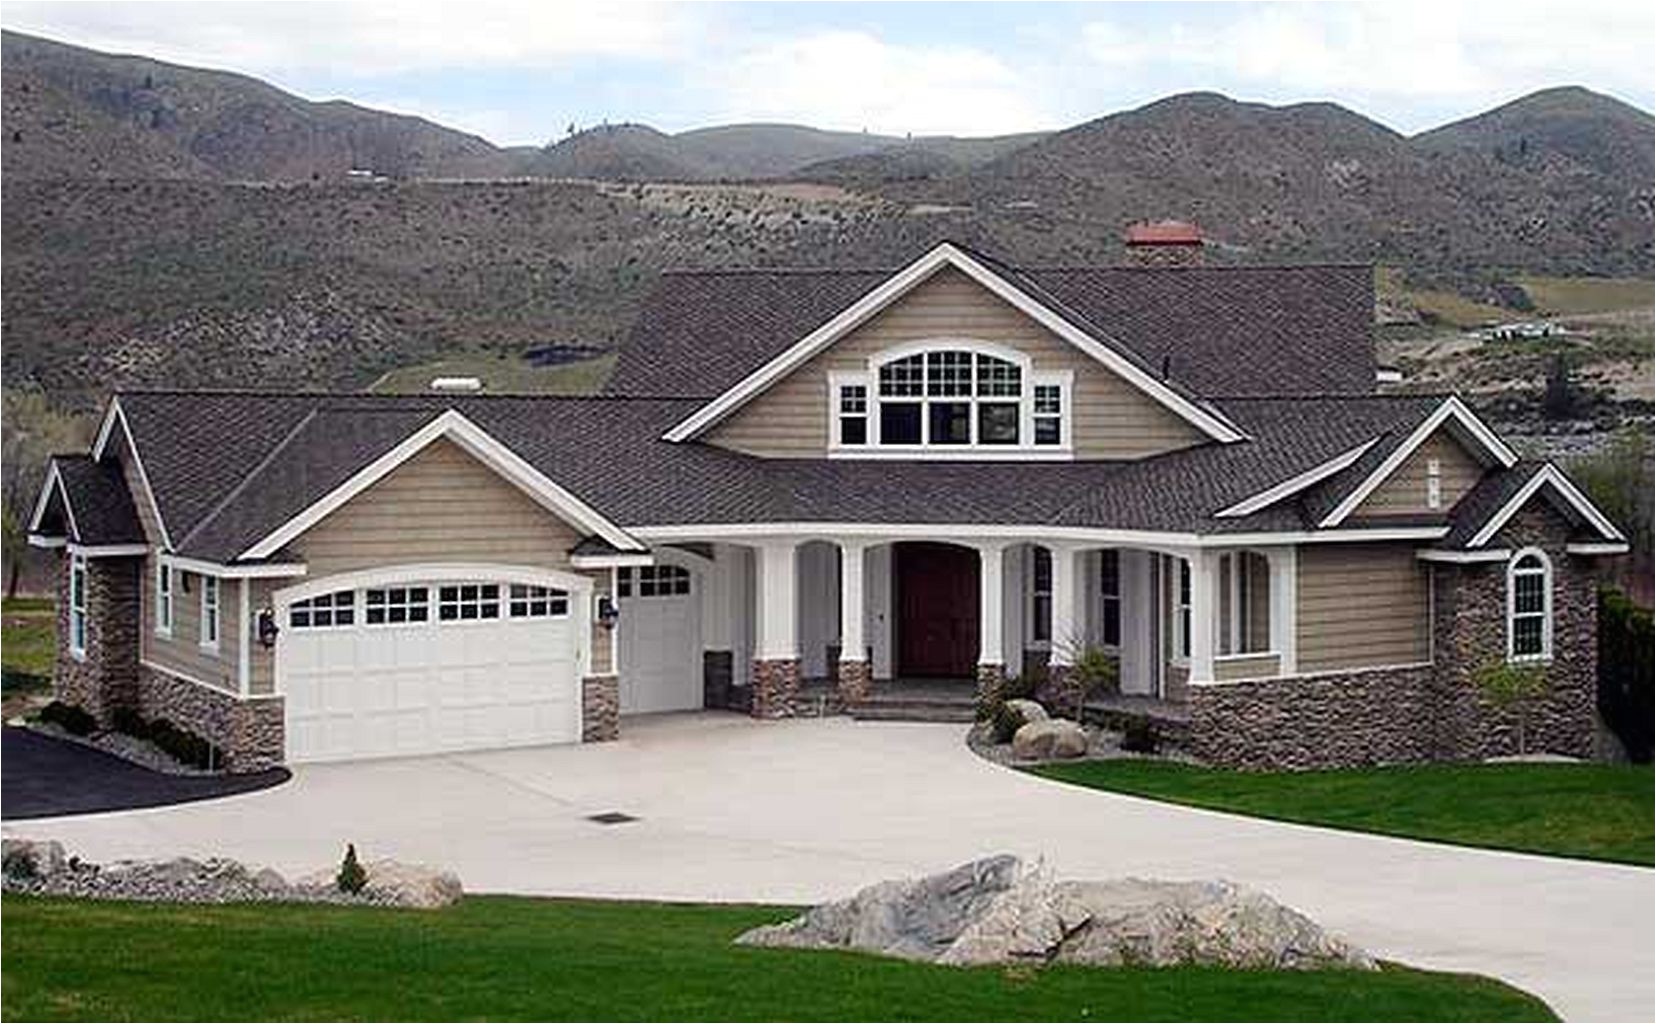 craftsman style homes plans photo galleries ideas 16